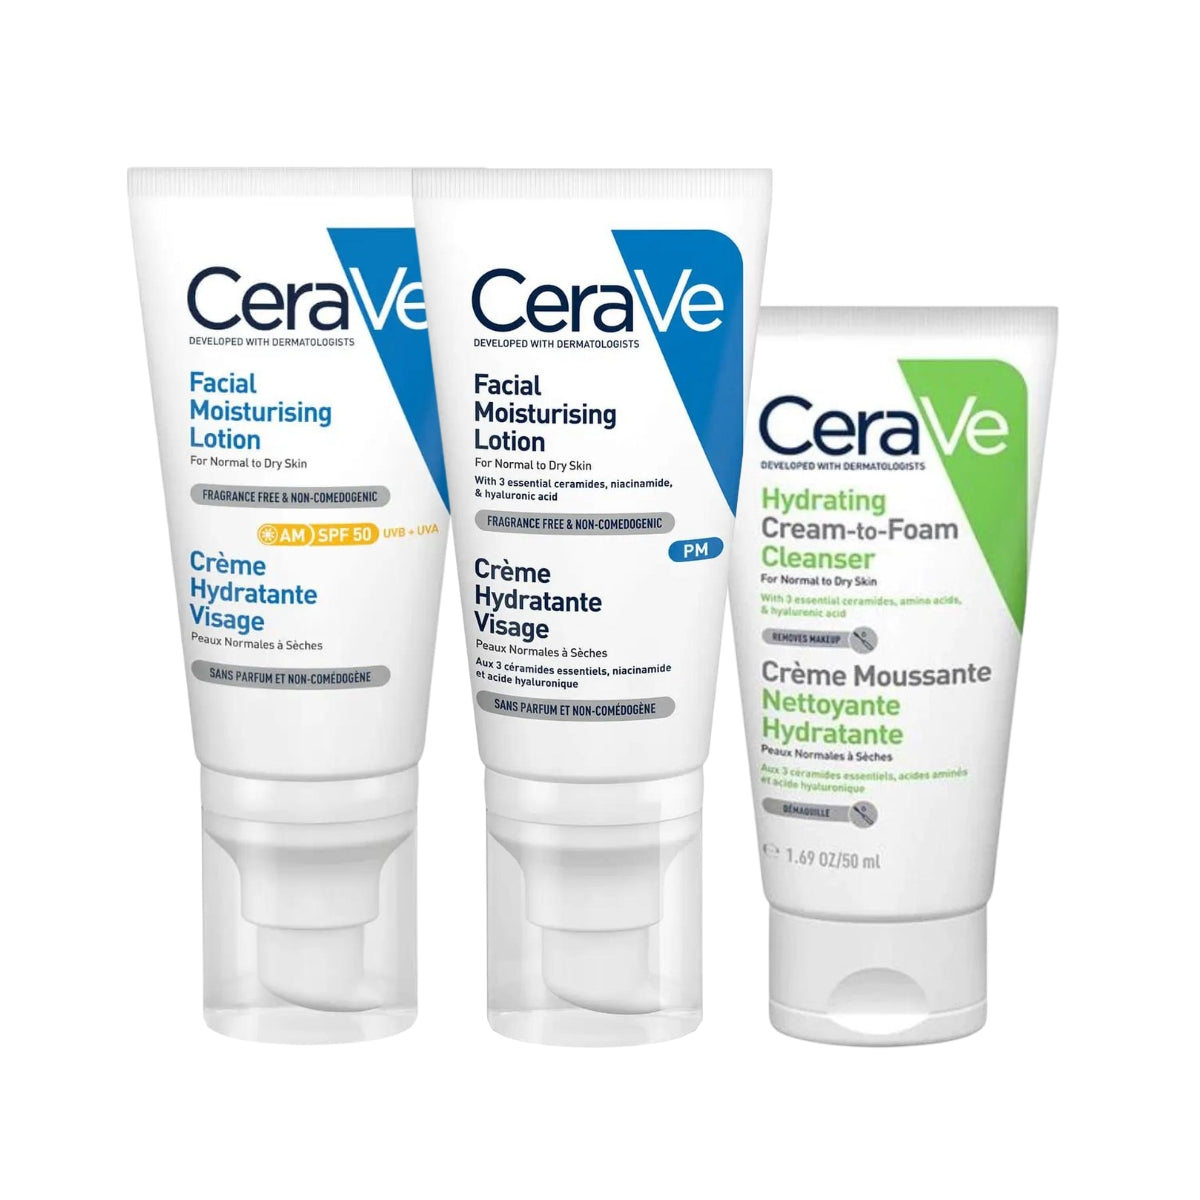 CeraVe Day & Night Facial Routine.